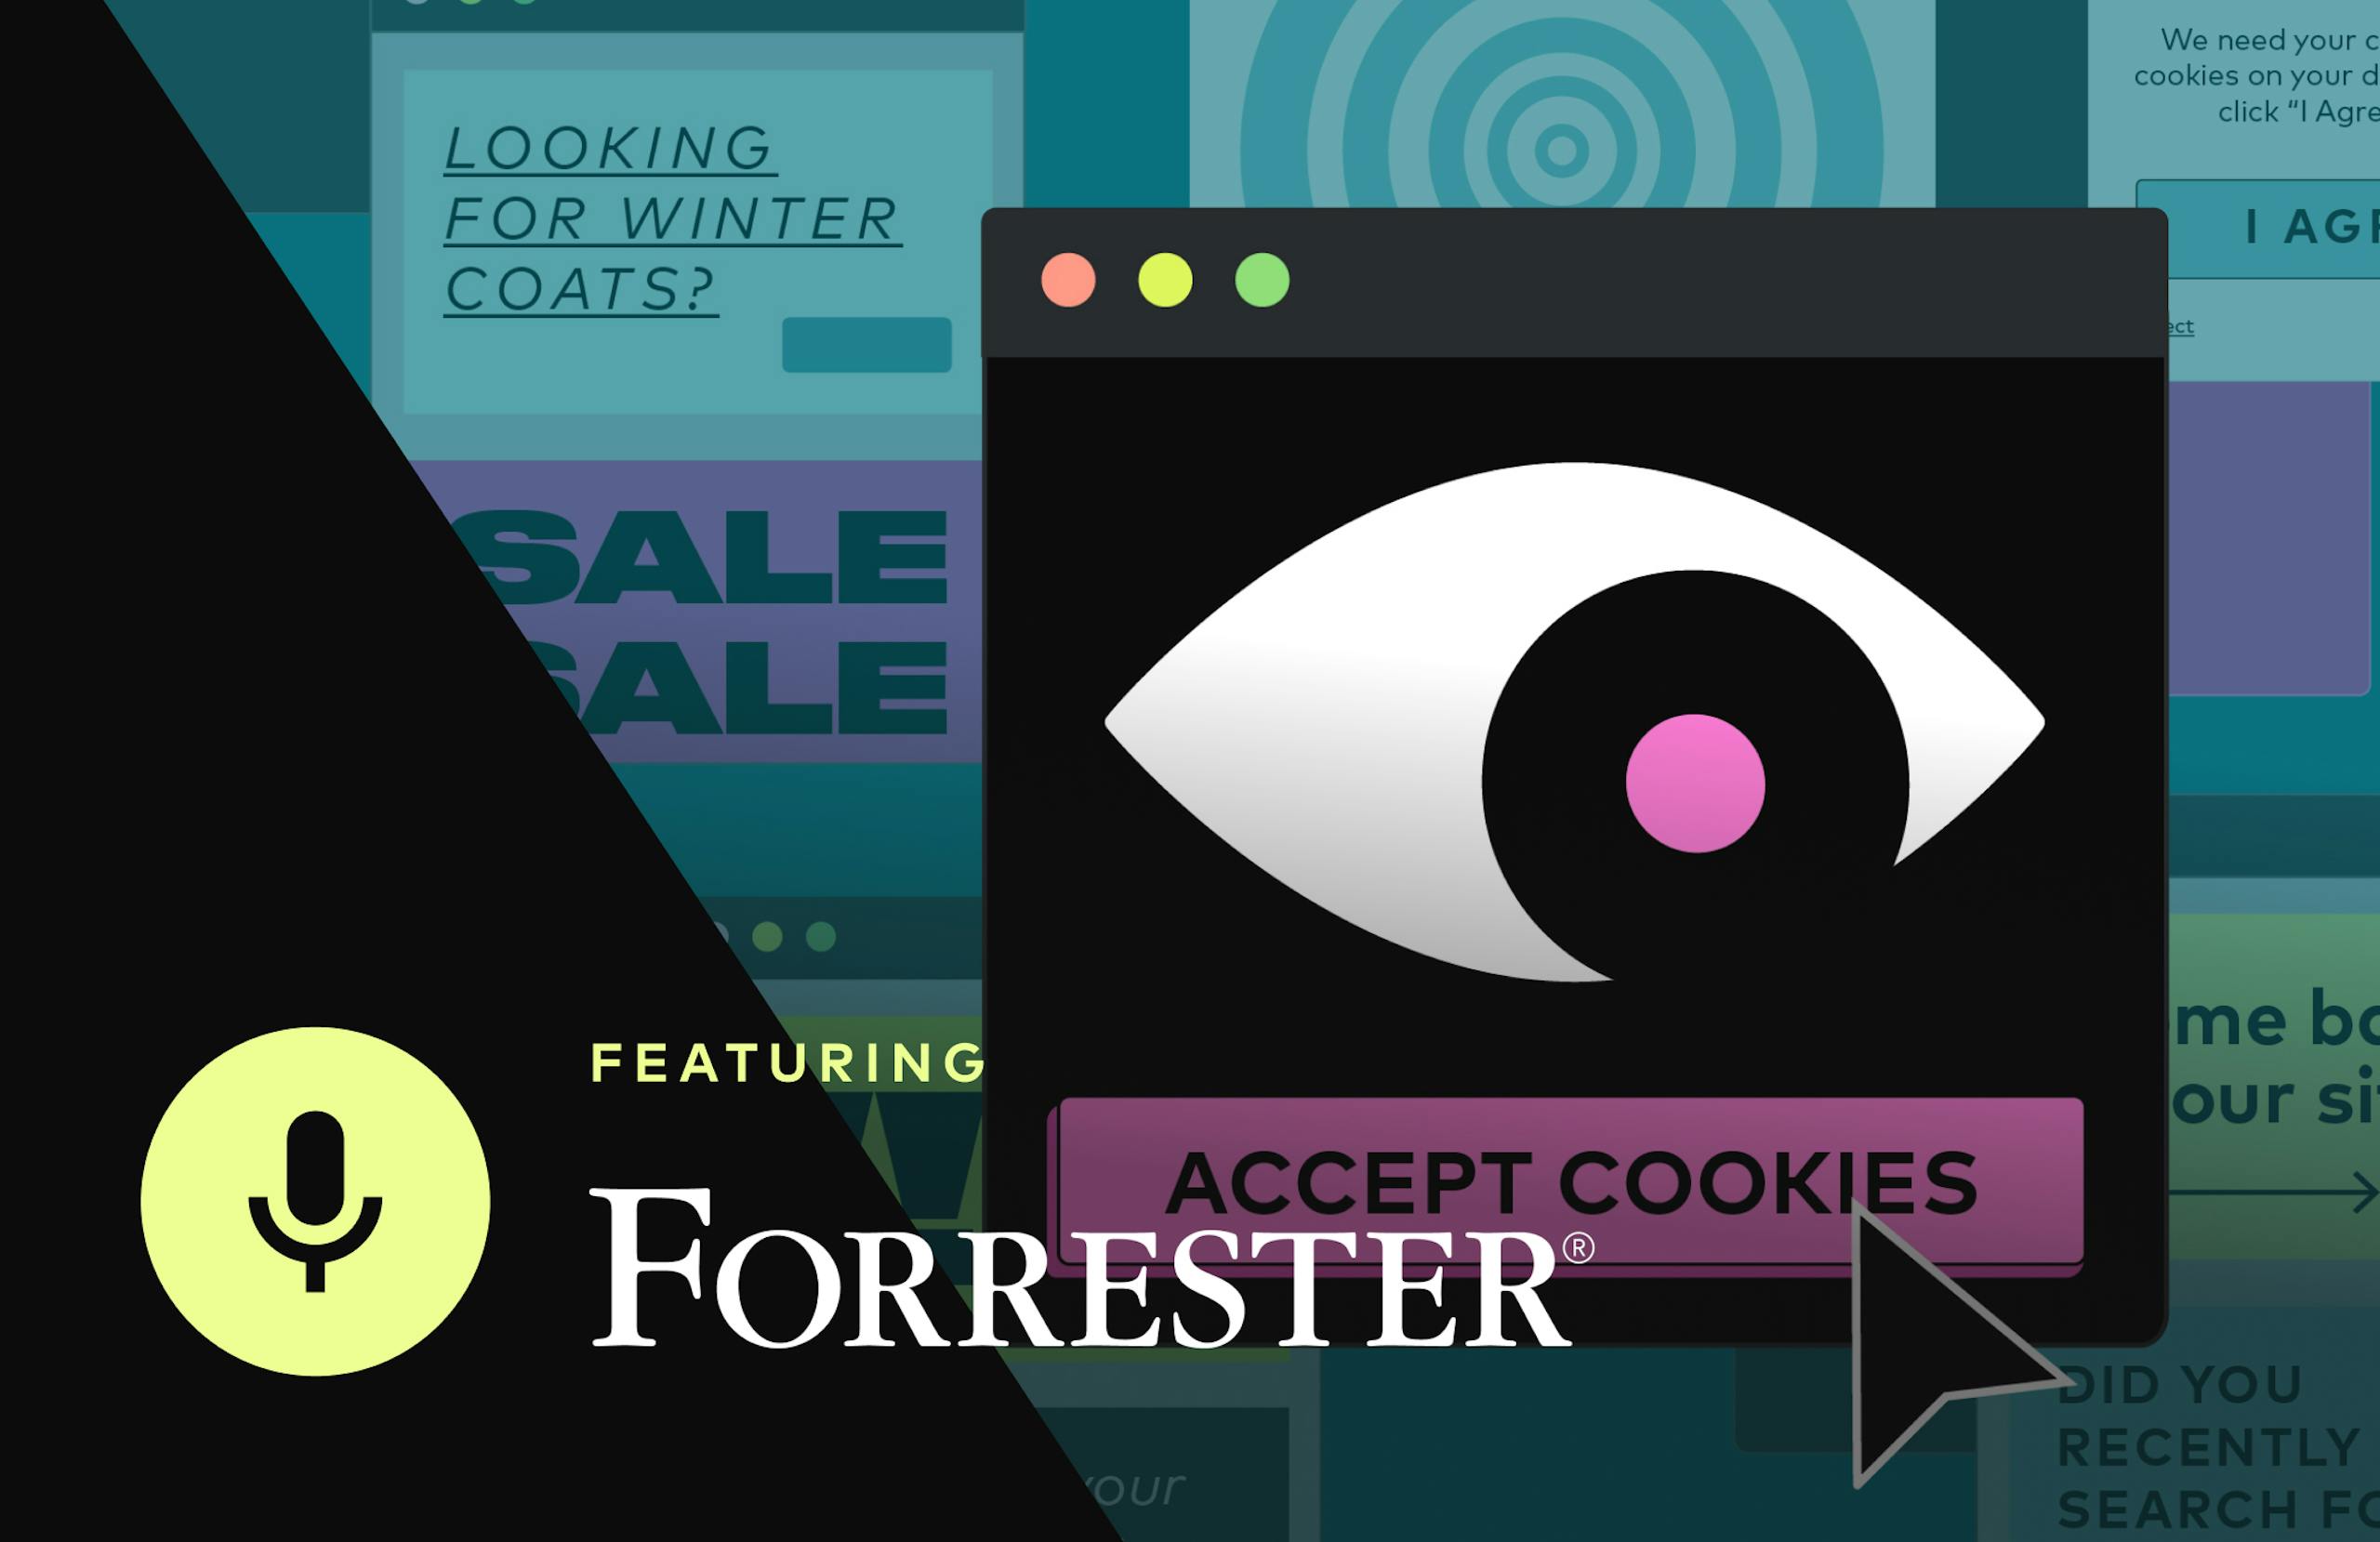 Browser window containing an eye looking towards a button labeled "Accept cookies", overlaid with text "Featuring Forrester".